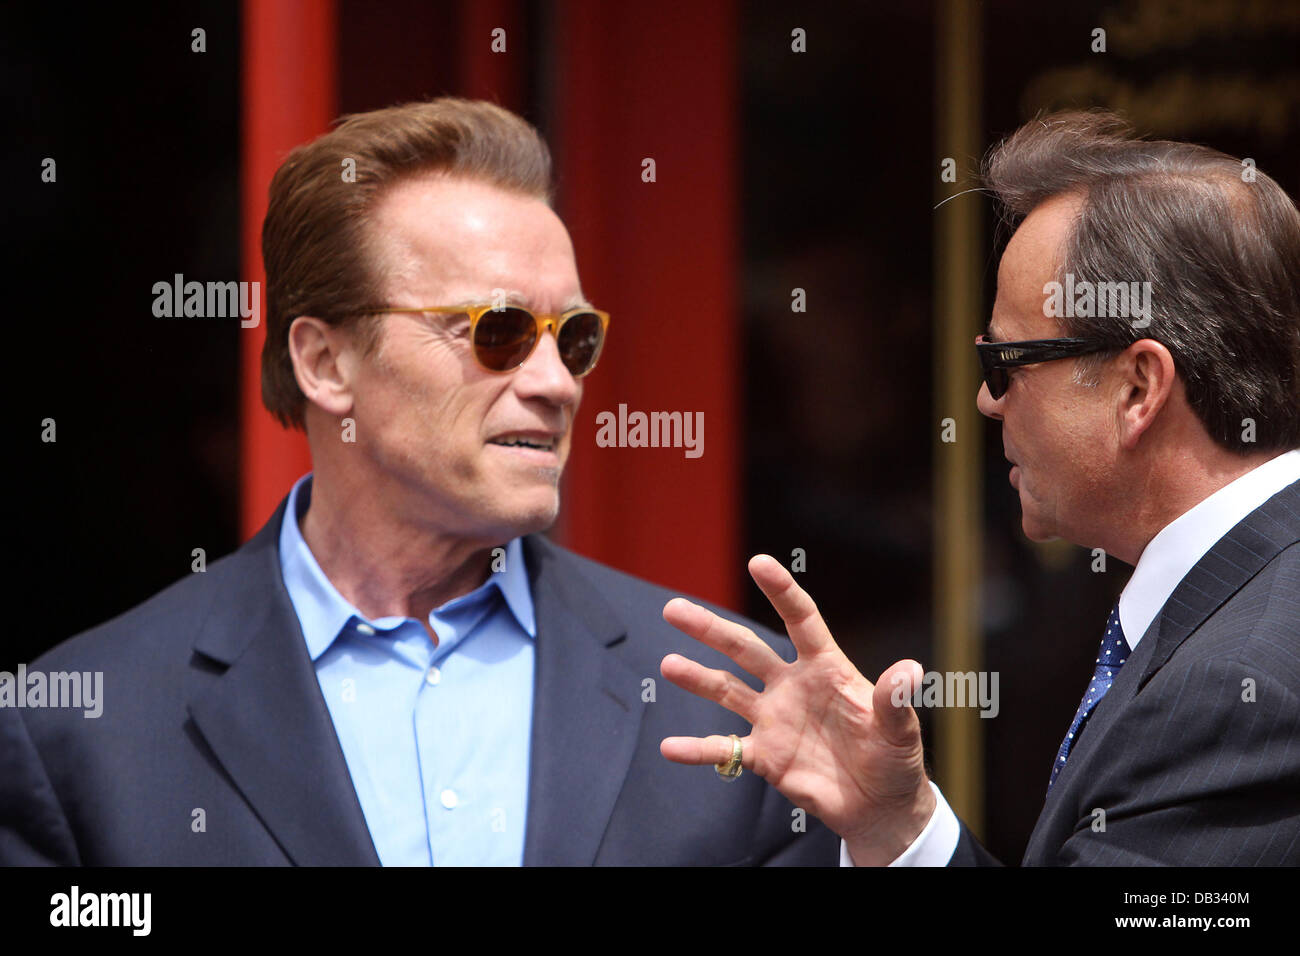 Arnold Schwarzenegger out and about in The Grove Los Angeles, California - 07.04.11 Stock Photo